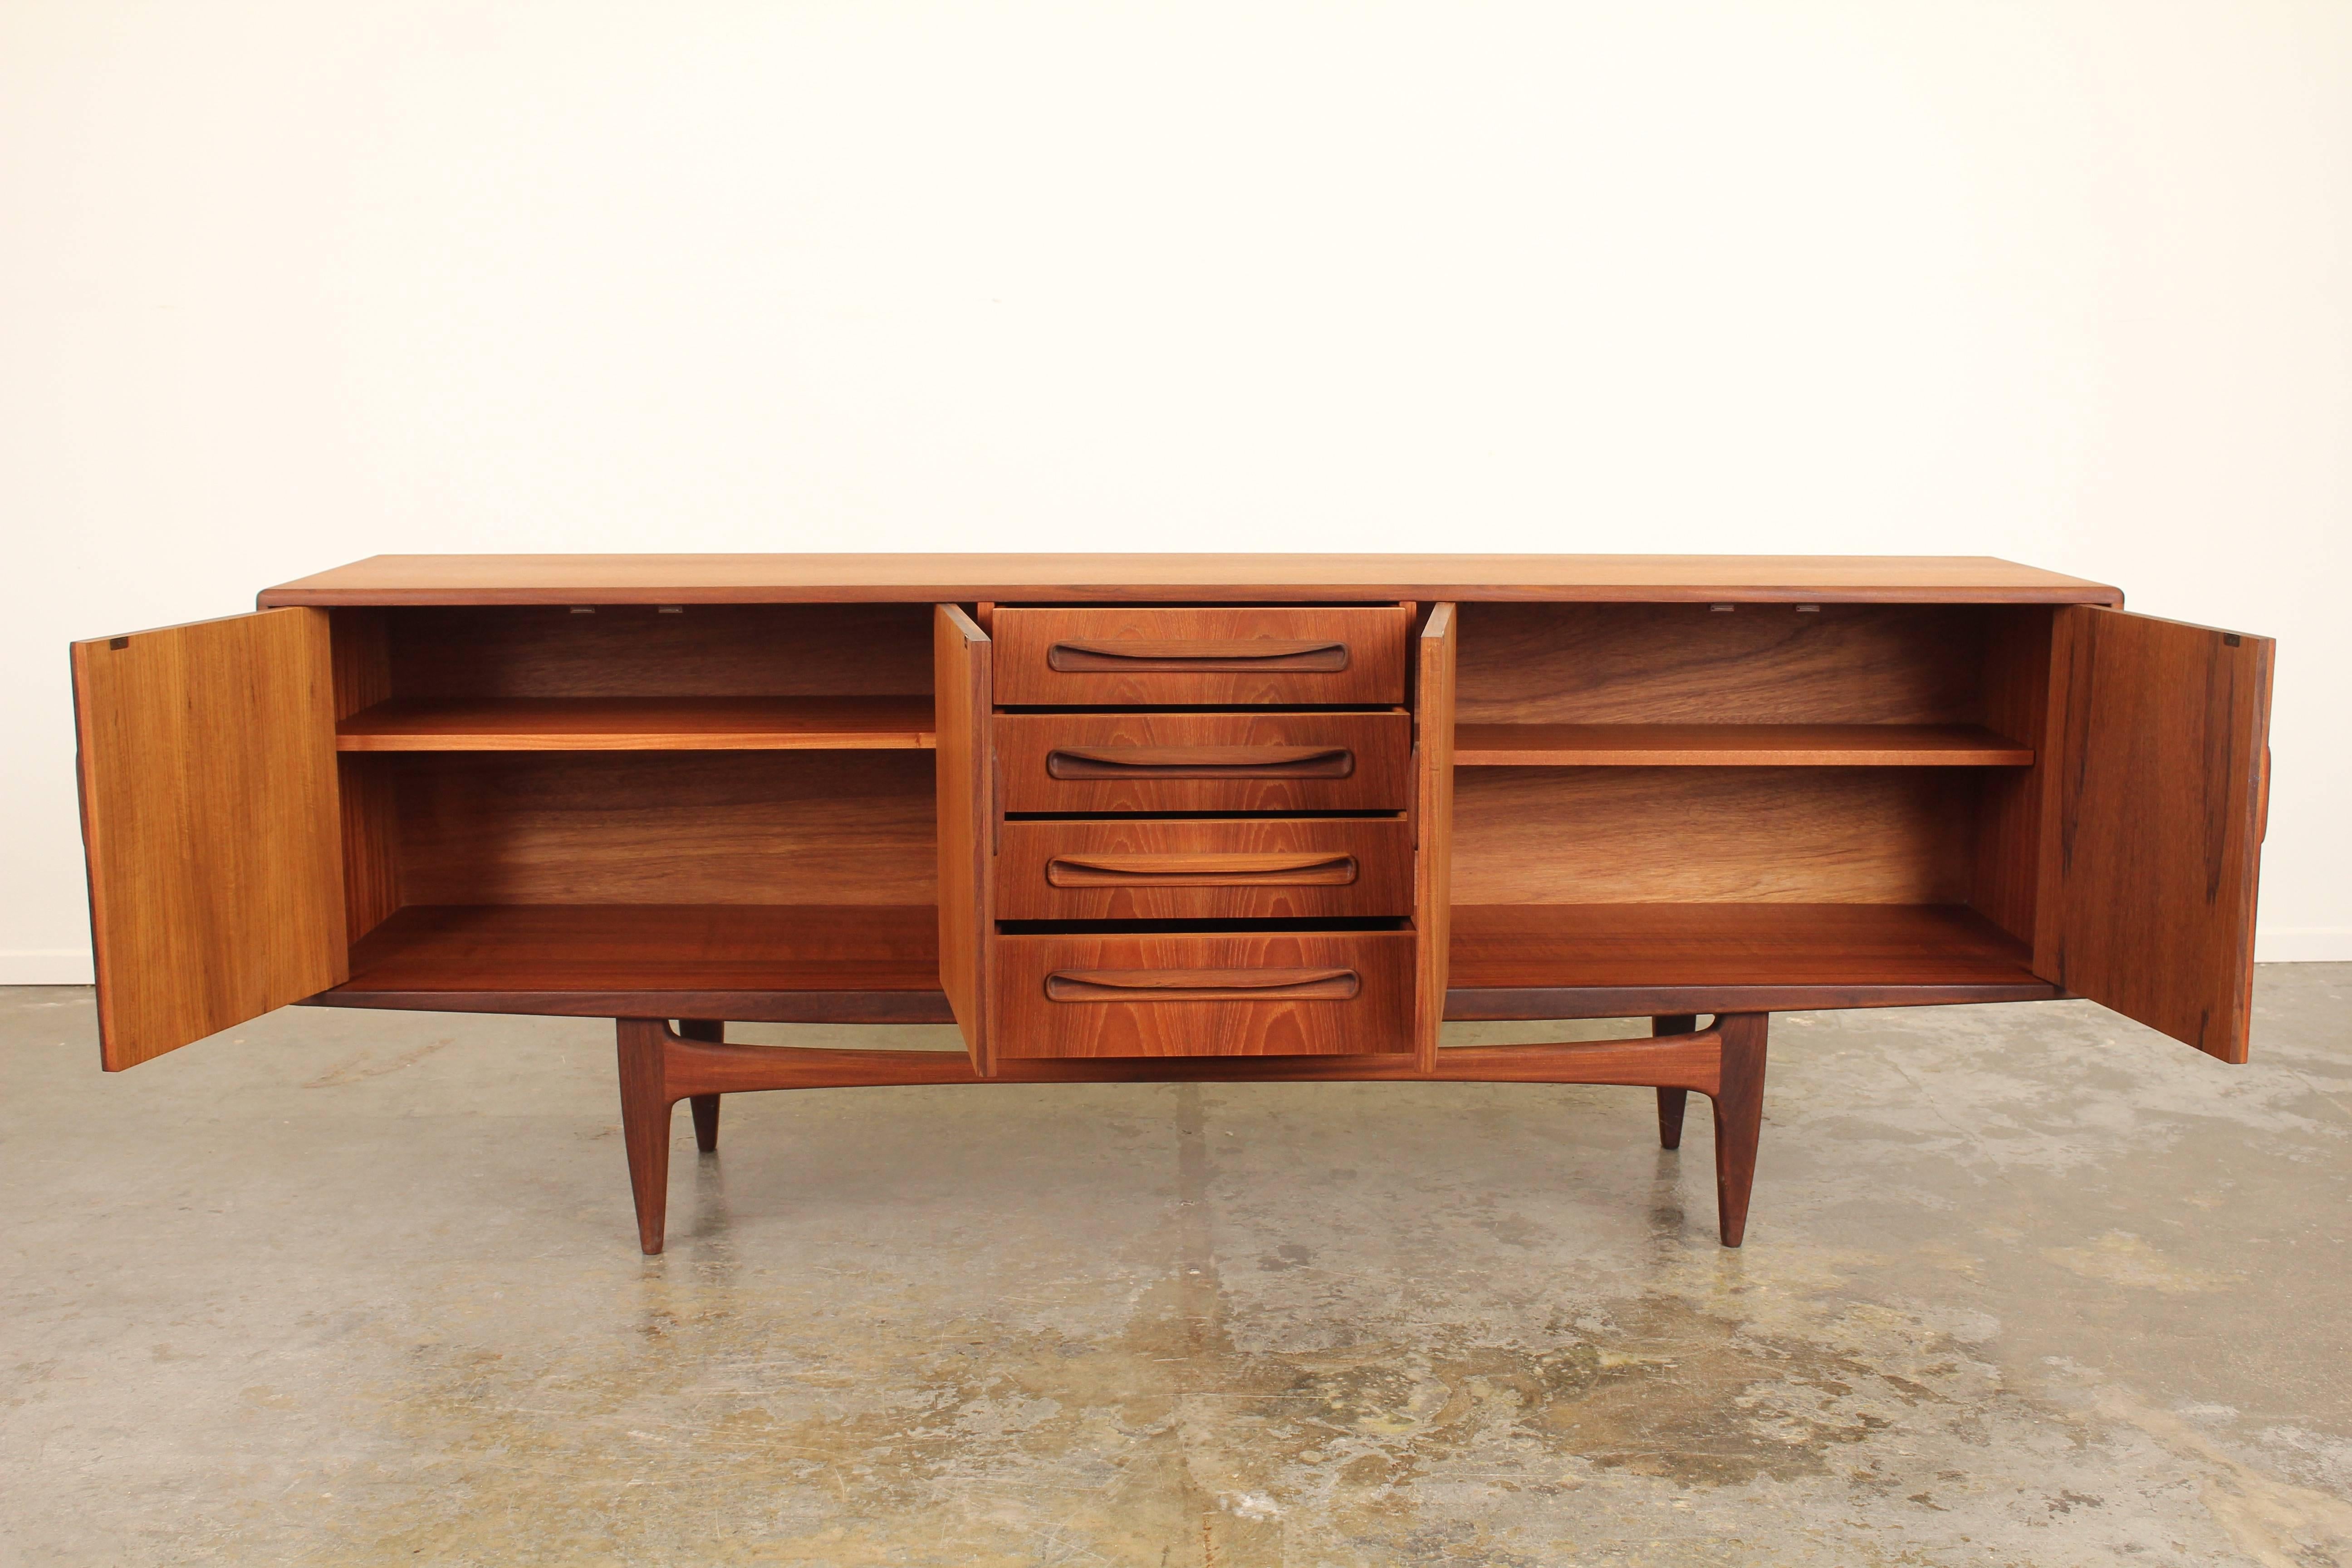 Fantastic teak sideboard made in England by G-Plan.  Beautiful butterfly and catherdral grain throughout the piece.  Carved handles and sculptural legs made out of a contrasting teak.  Newly refinished.